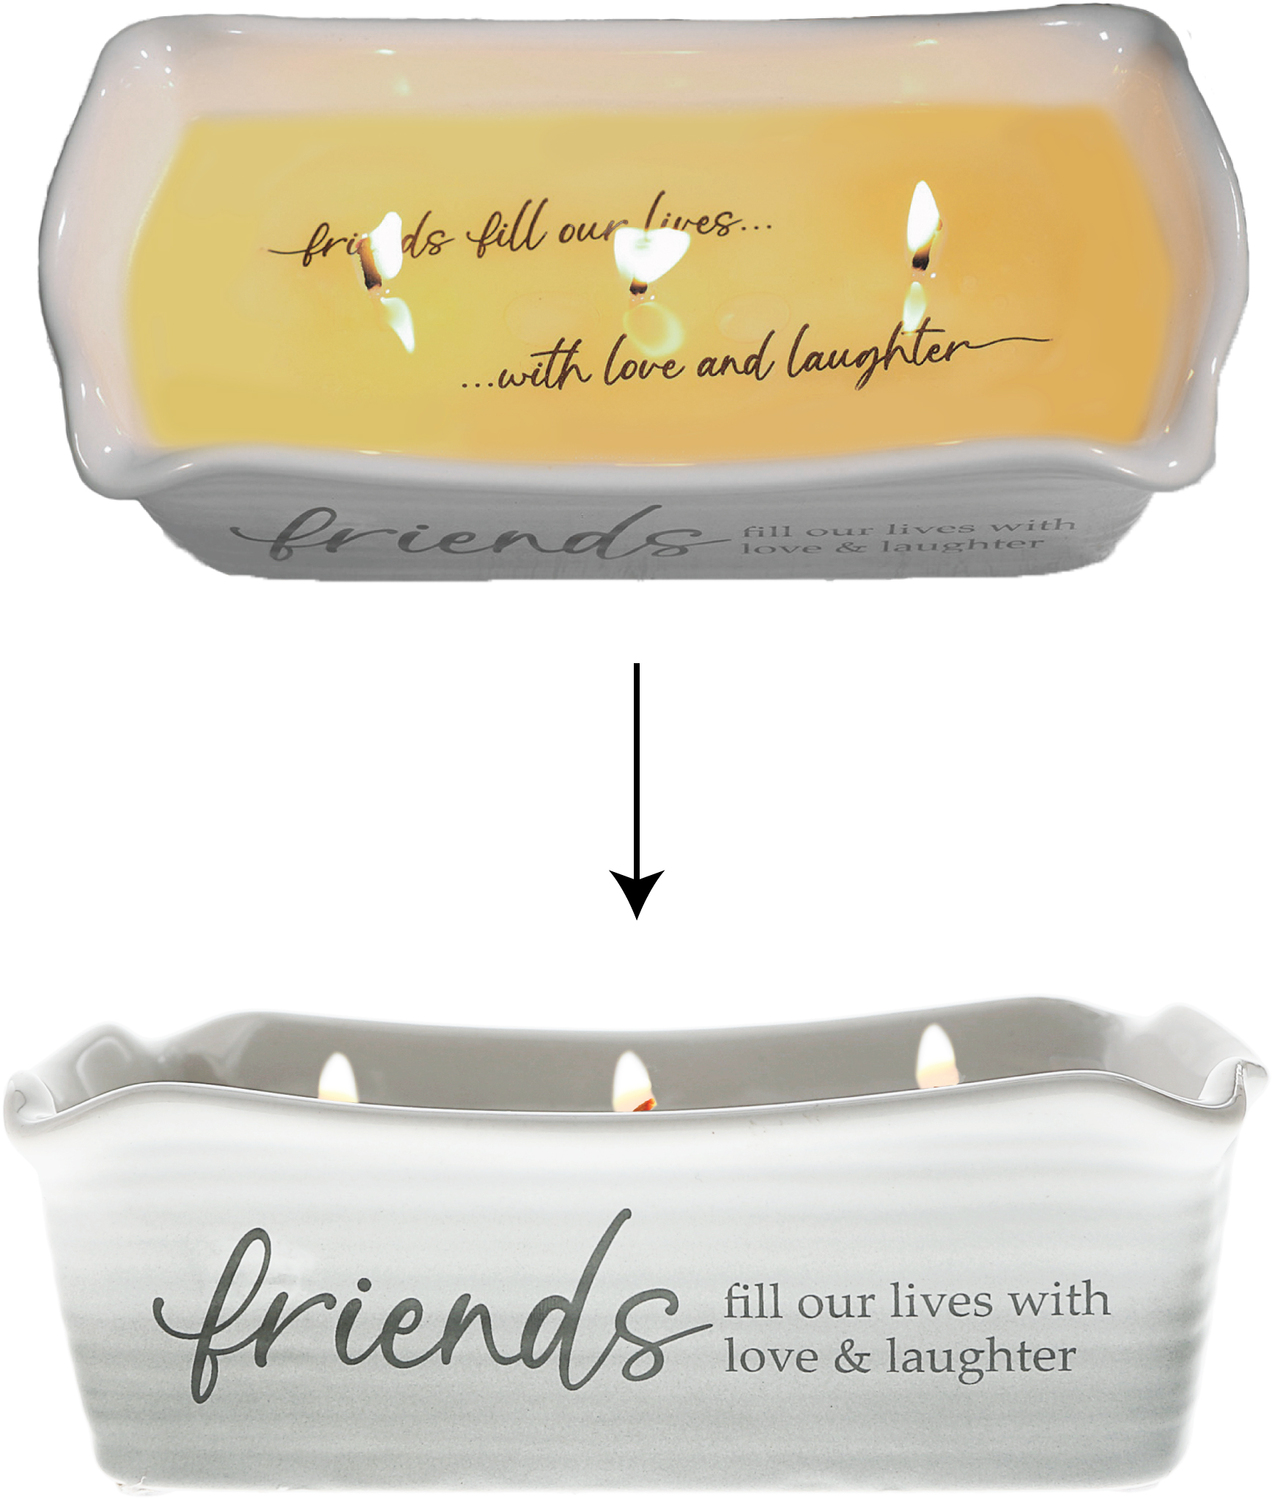 Friends by Thoughts of Home - Friends - 12 oz - 100% Soy Wax Reveal Triple Wick Candle
Scent: Tranquility